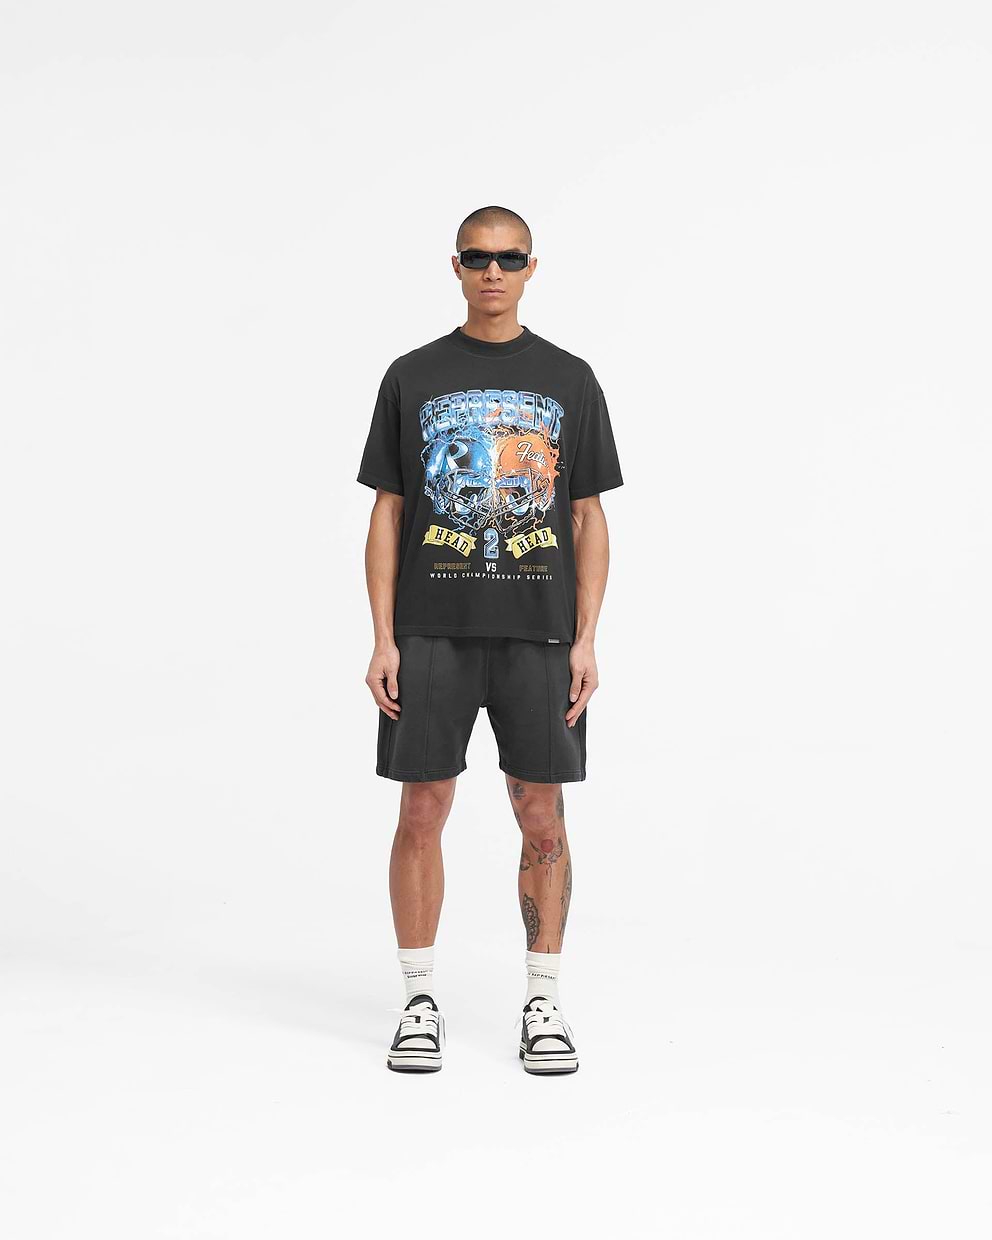 Represent X Feature Head 2 Head T-Shirt - Stained Black